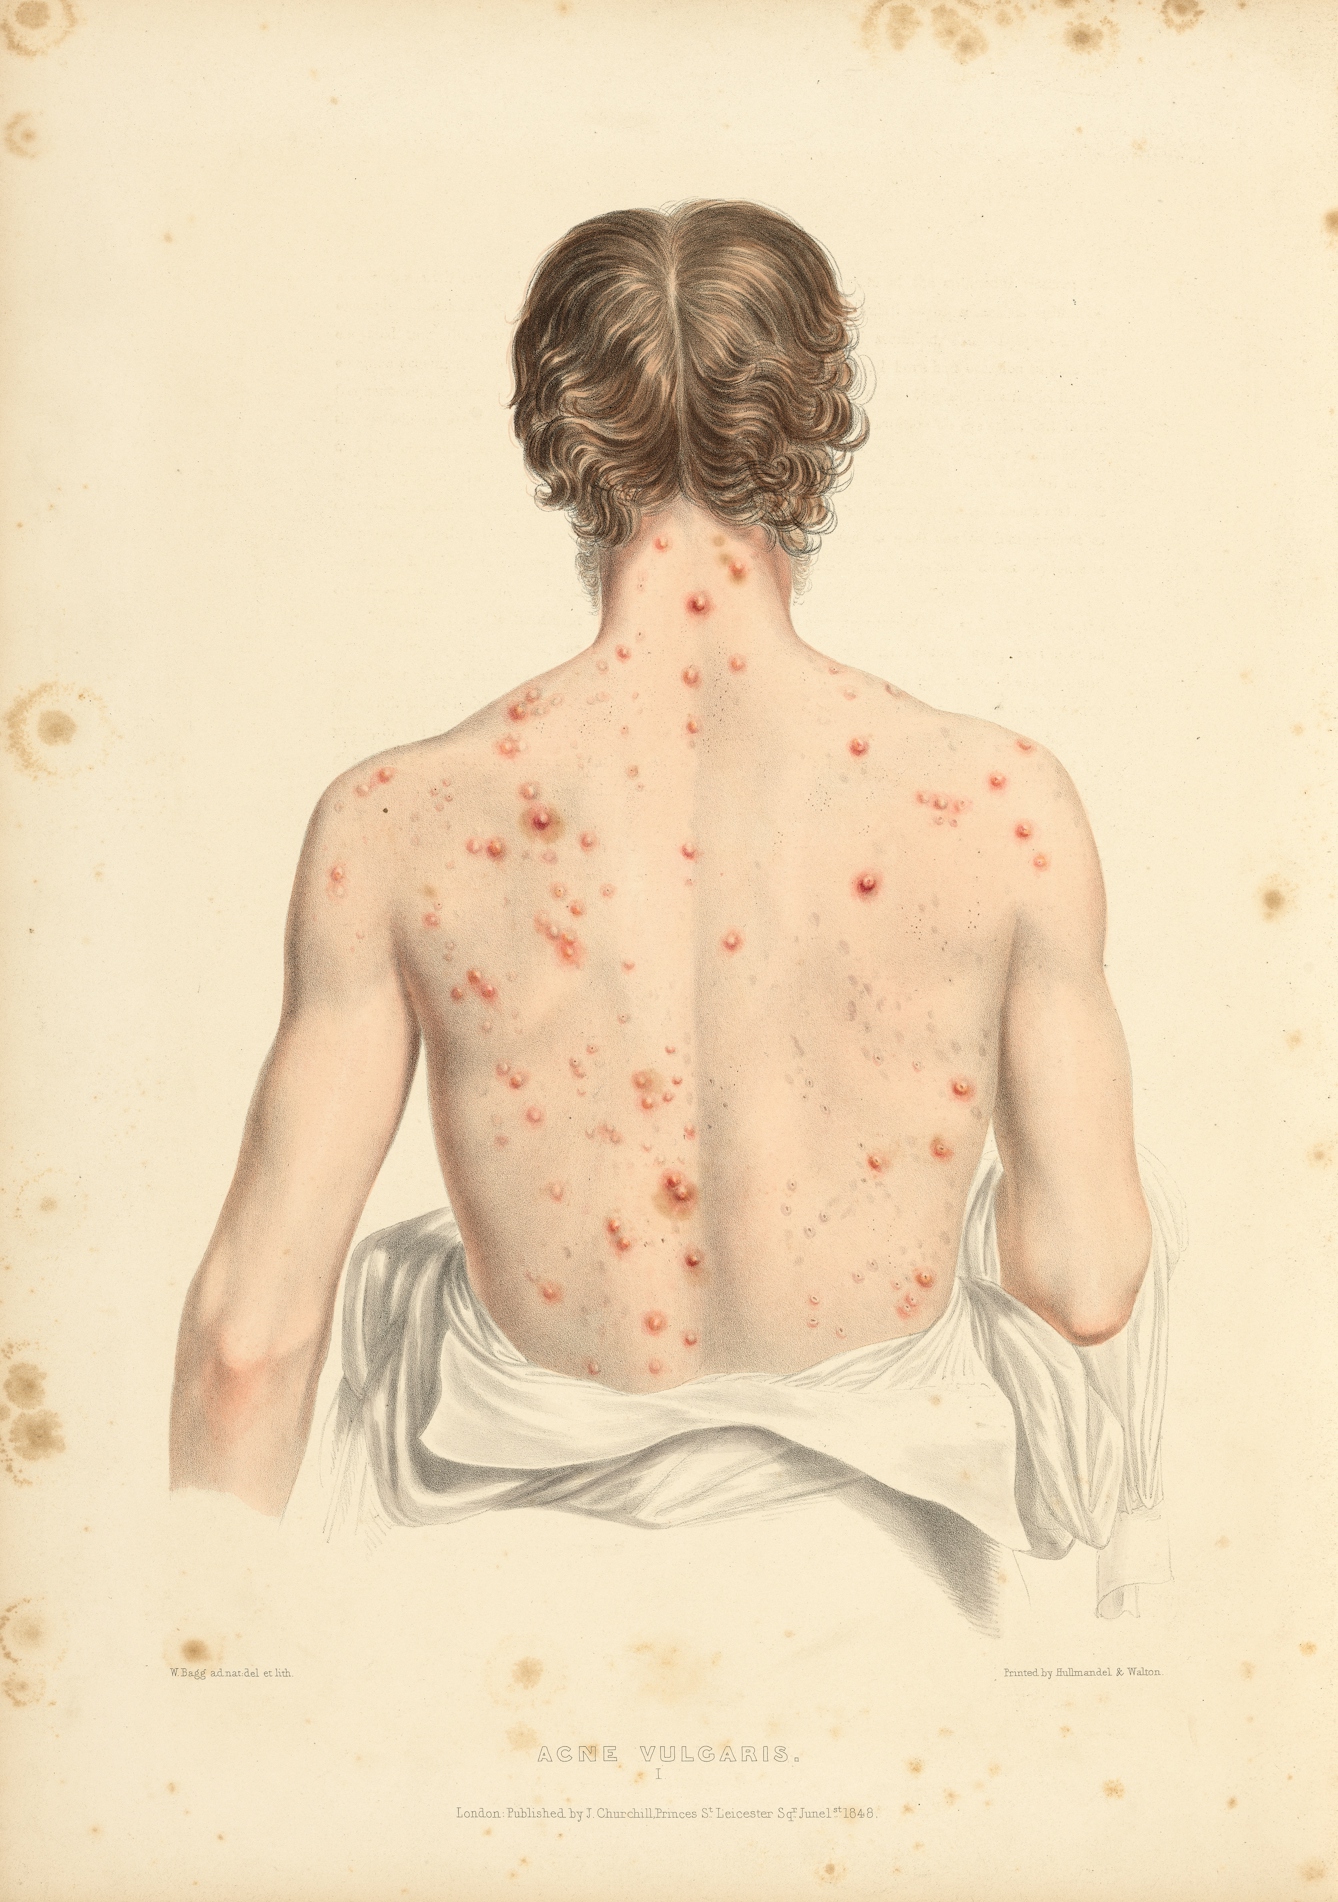 Photograph of an illustration showing the back of a man's head, neck and back. On his neck and back are acne keloids. 